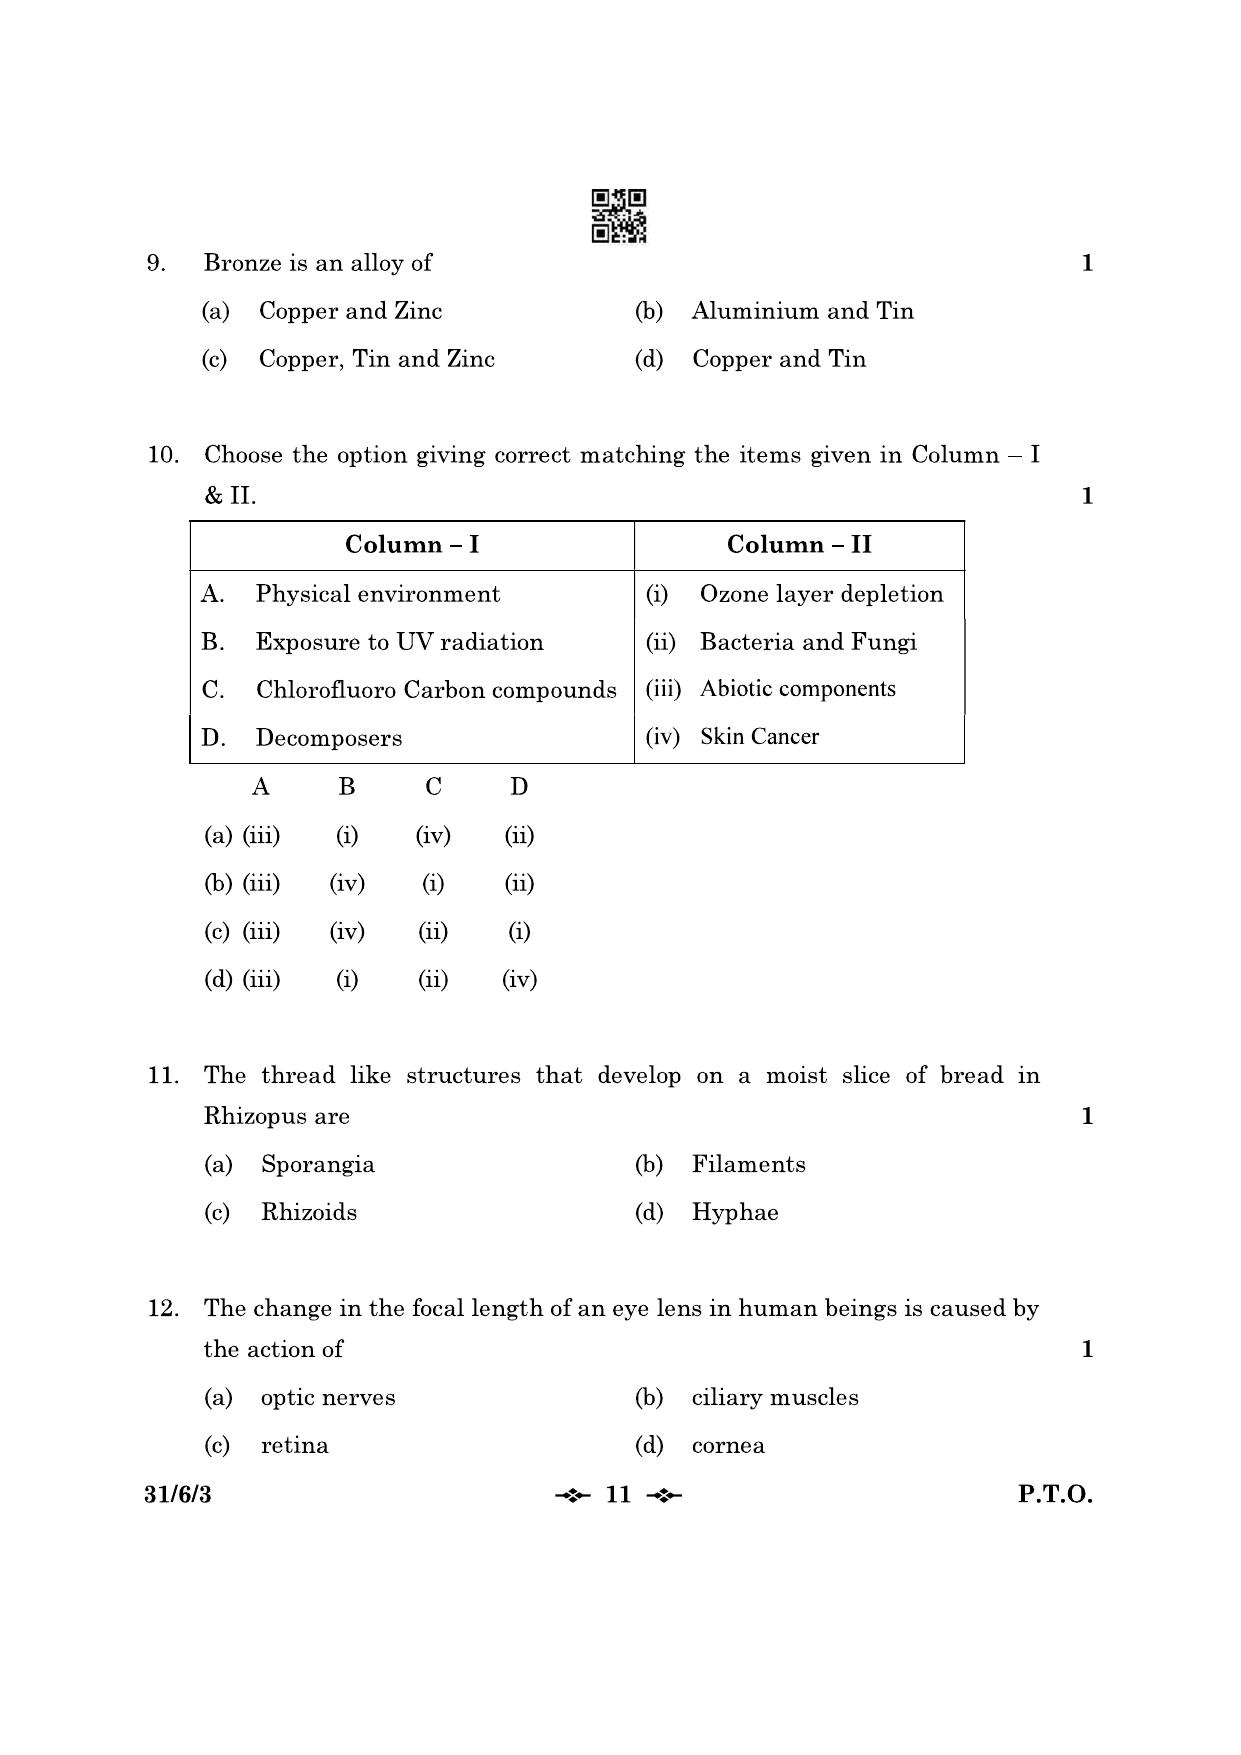 CBSE Class 10 31-6-3 Science 2023 Question Paper - Page 11